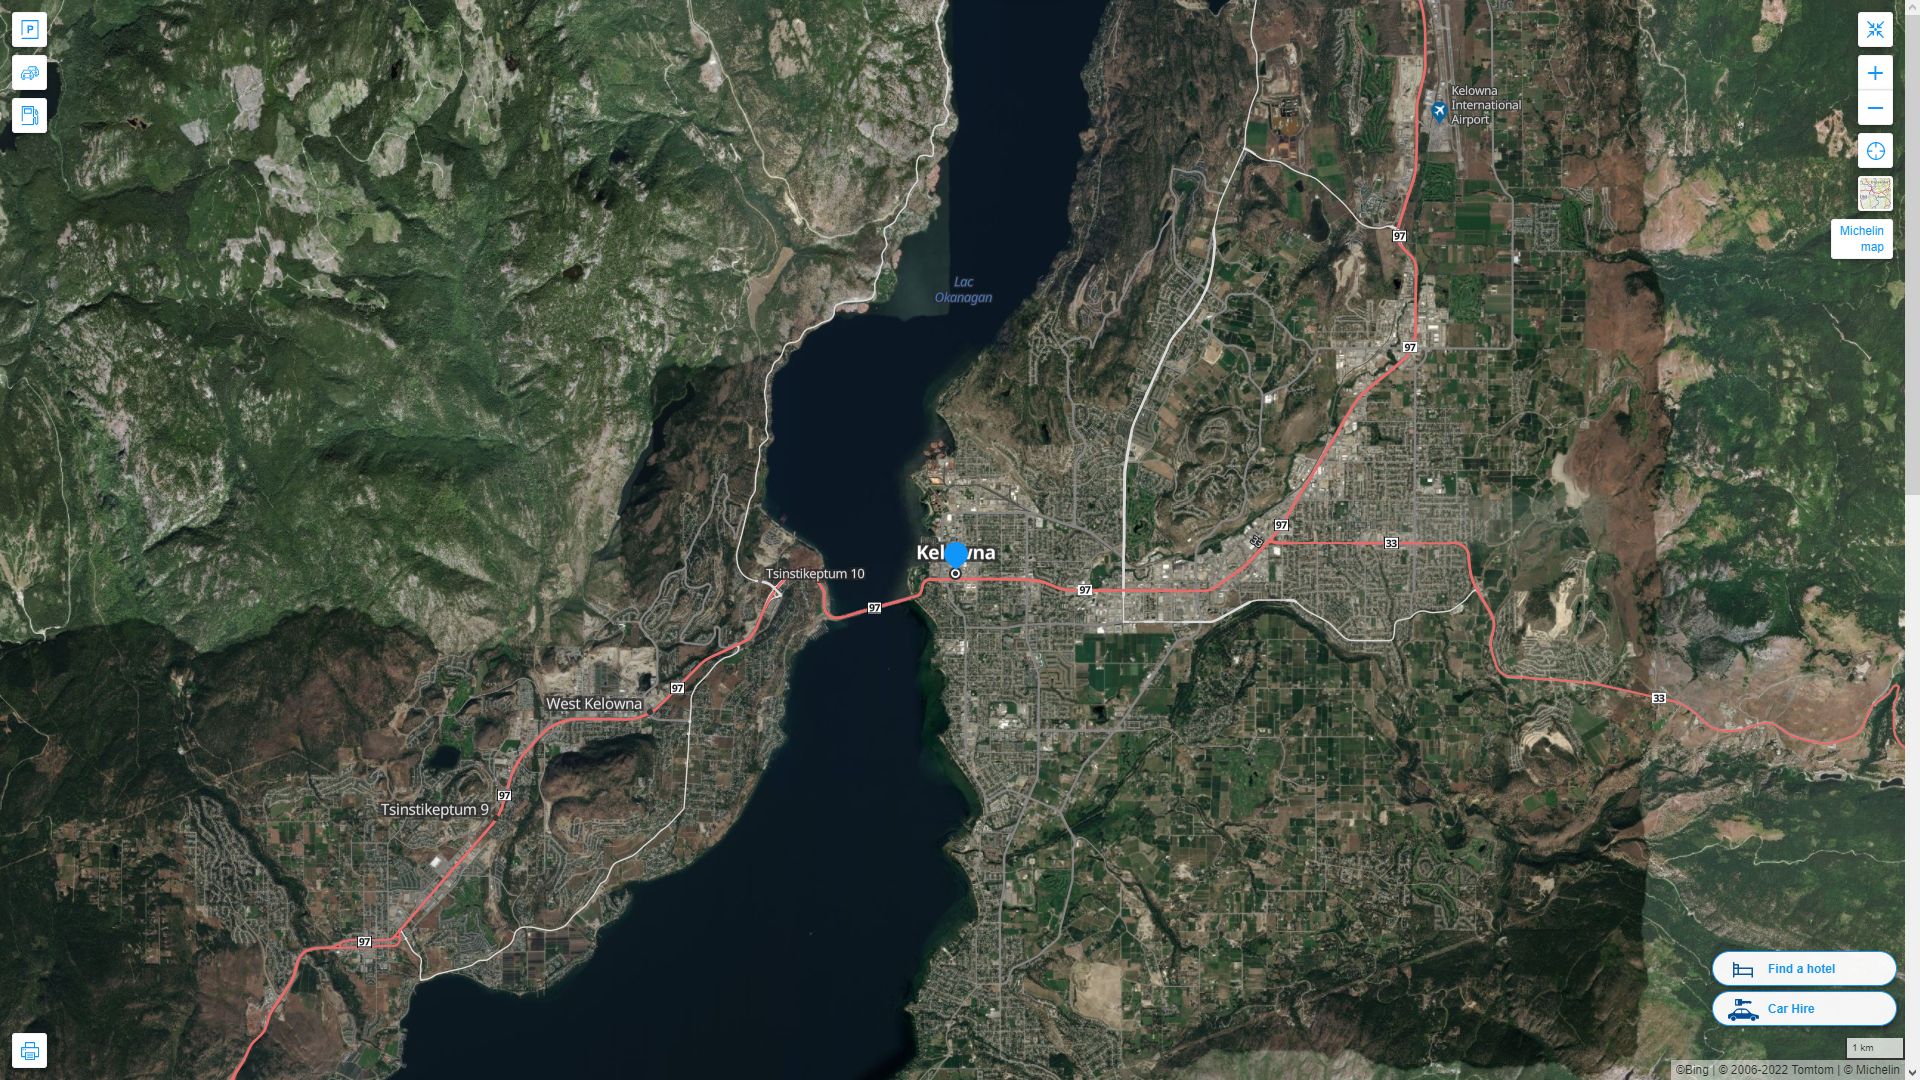 Kelowna Highway and Road Map with Satellite View